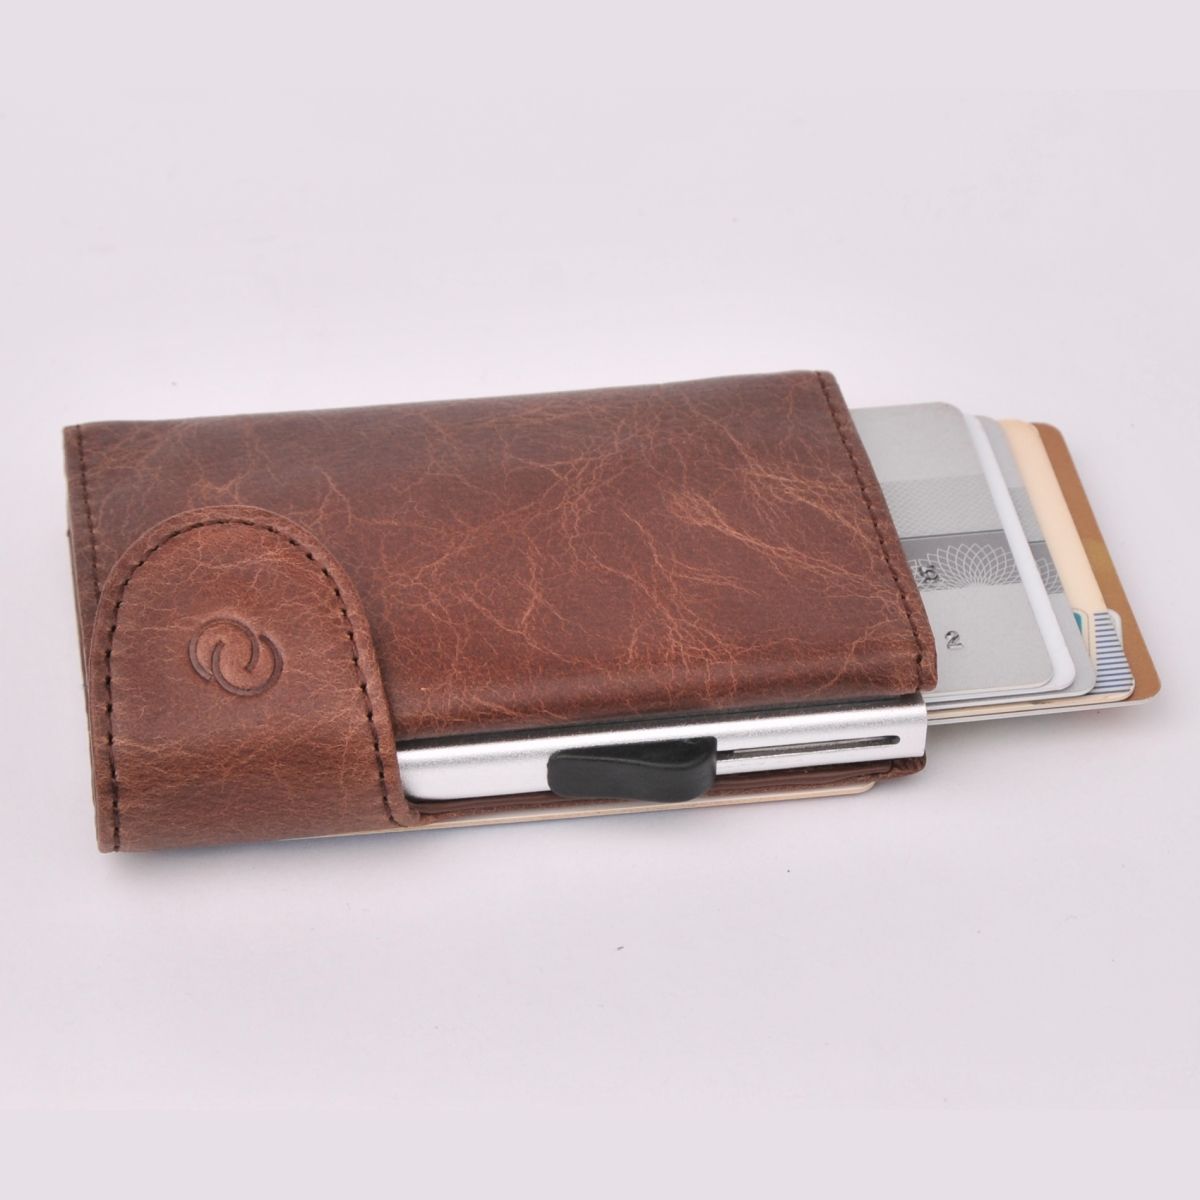 C-Secure Aluminum Card Holder with Genuine Leather - Dark Brown